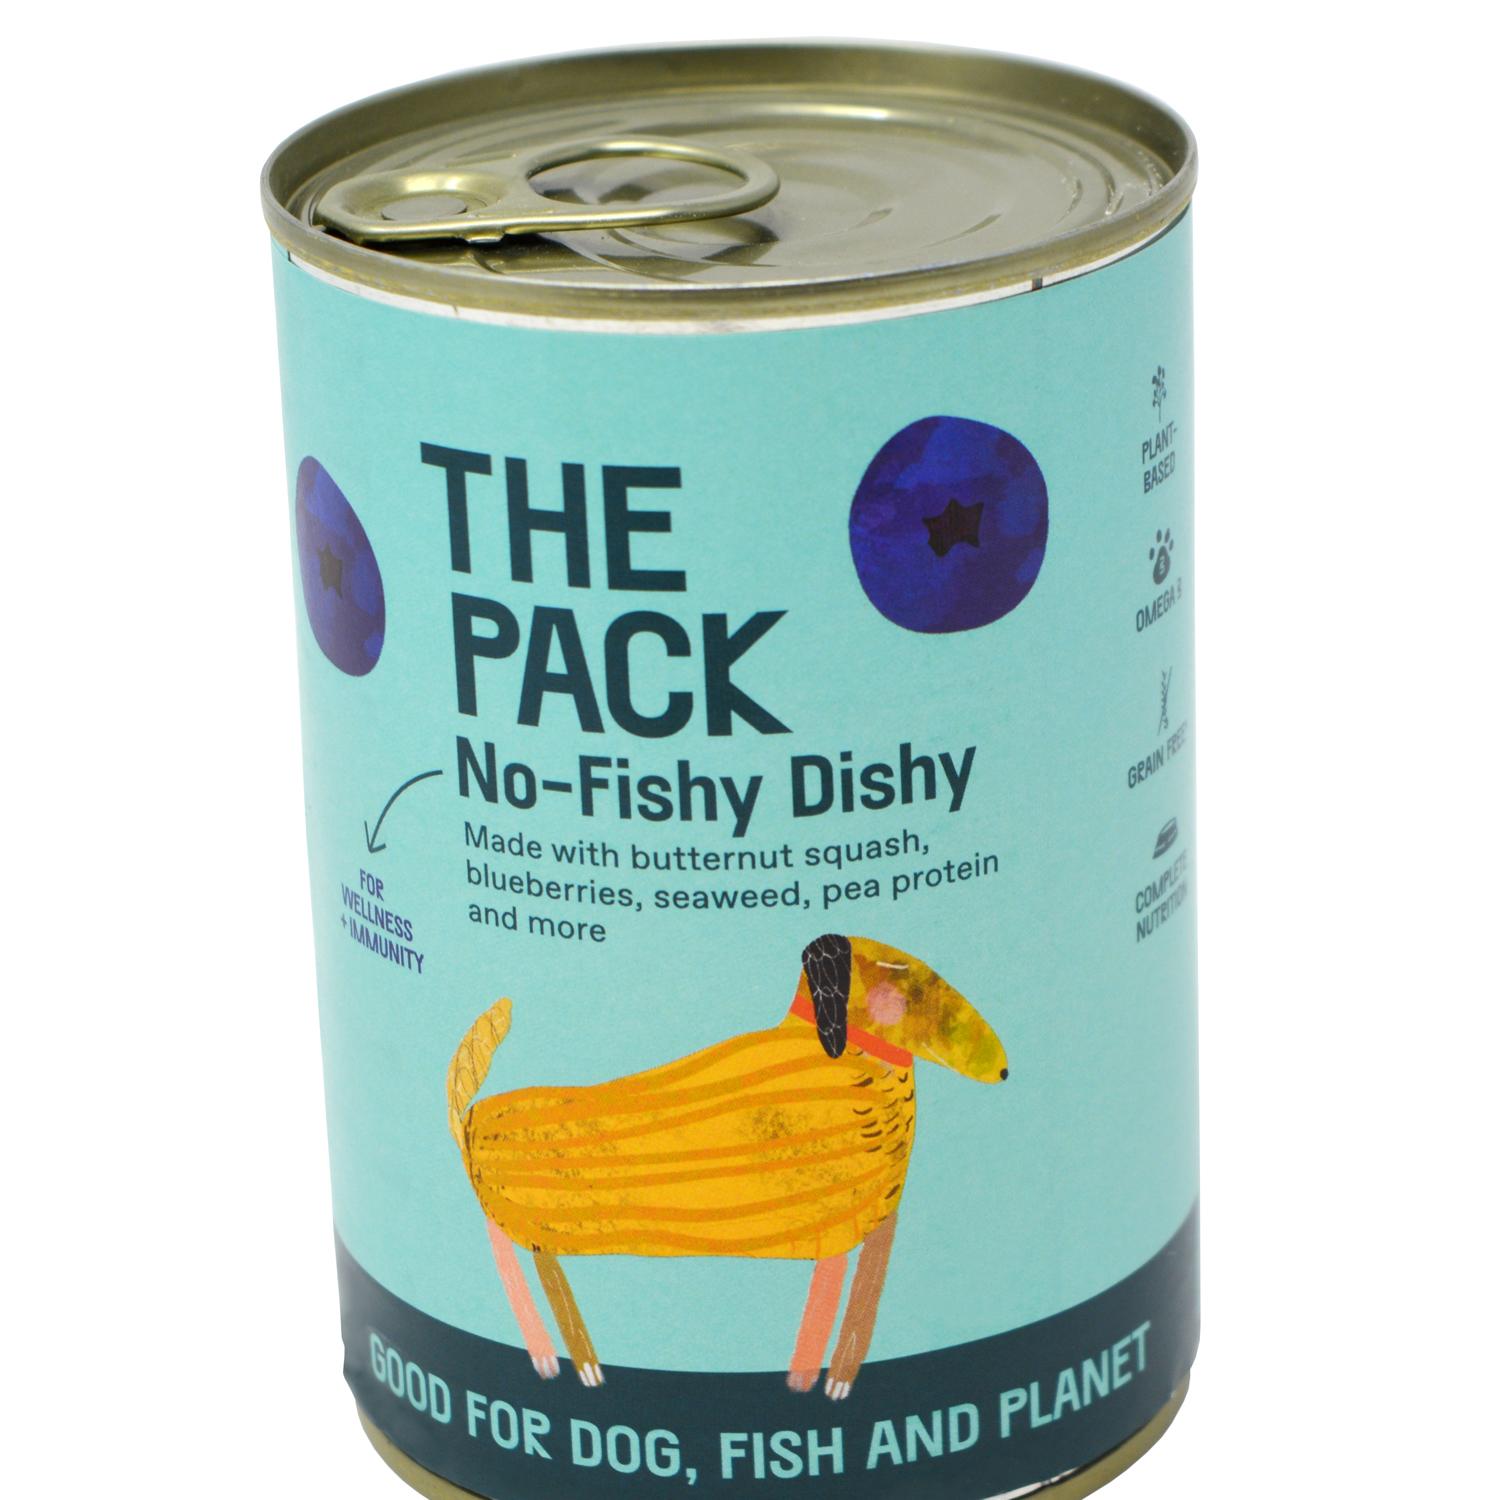 Close up of a can of The Pack No-Fishy Dishy Plant Based Dog Food